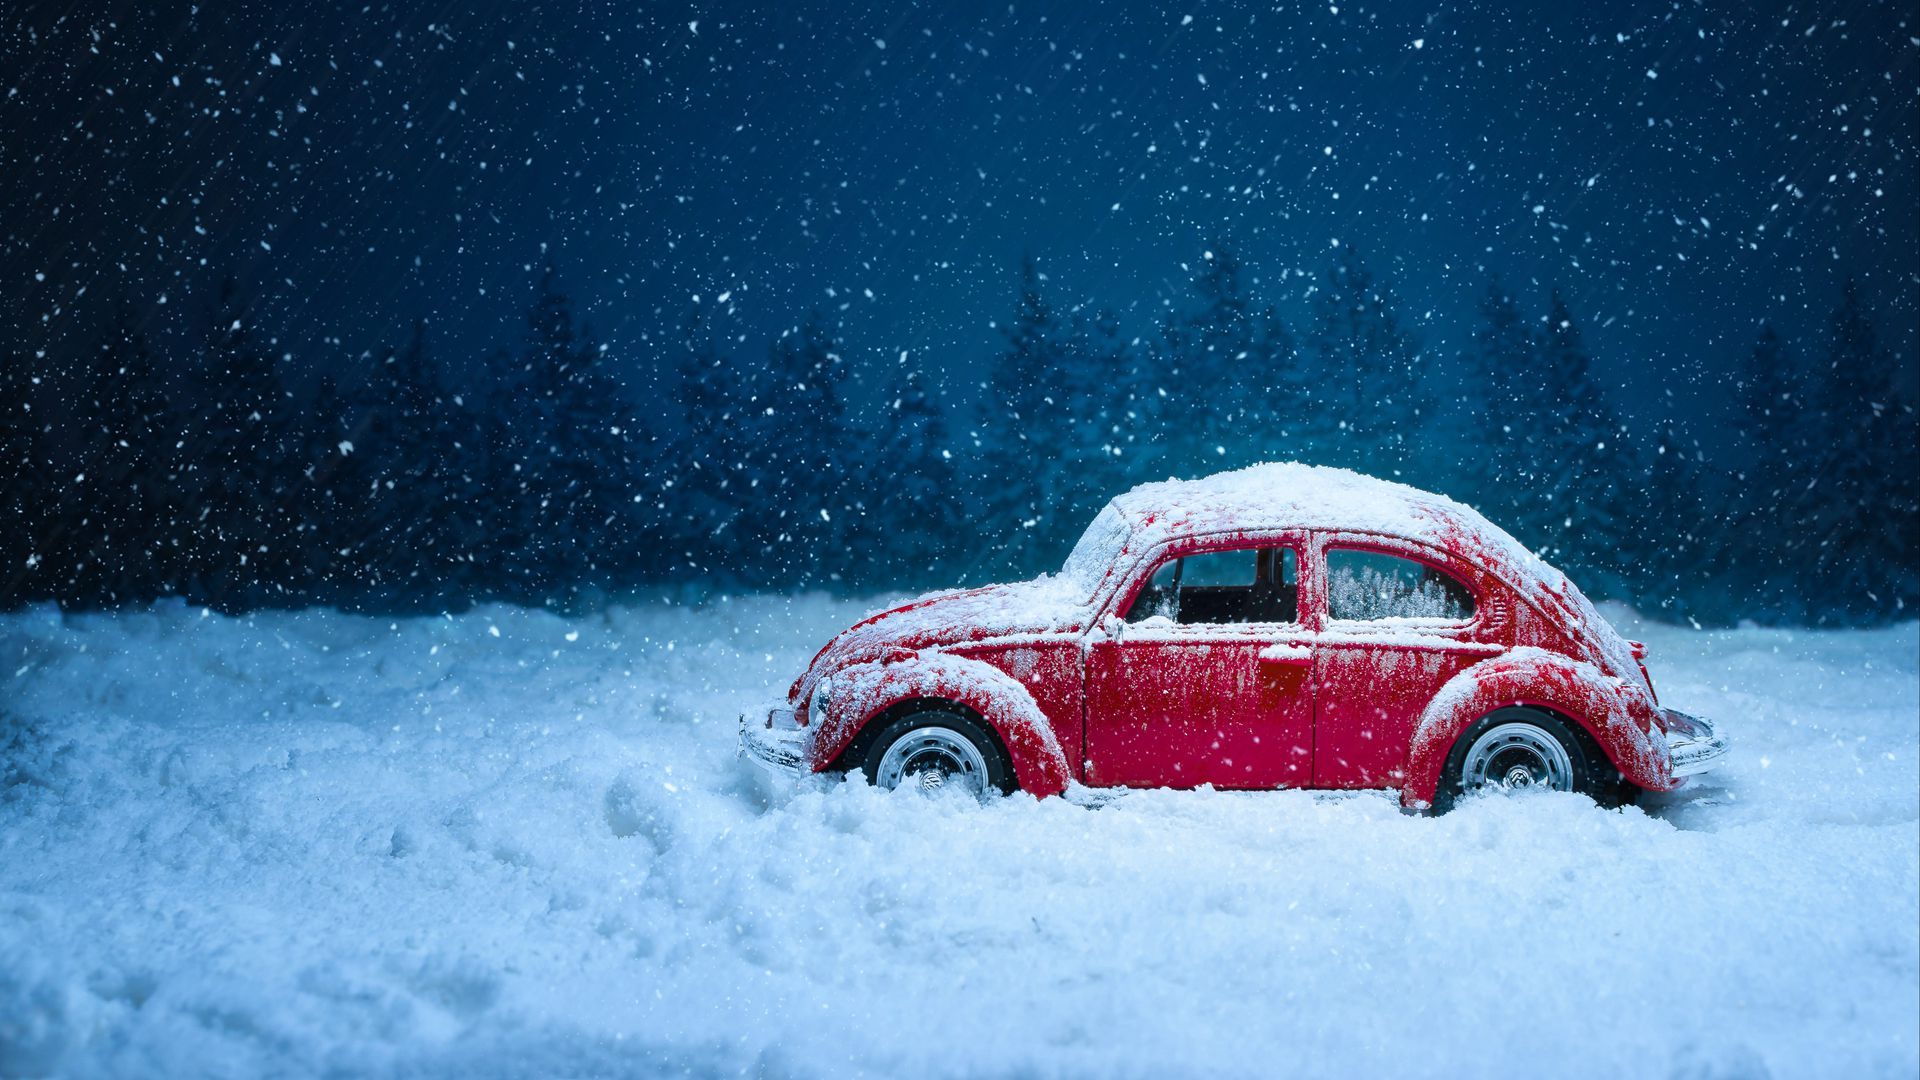 Download wallpaper 1920x1080 car, retro, winter, snow, snowfall, vintage, red, old full hd, hdtv, fhd, 1080p HD background